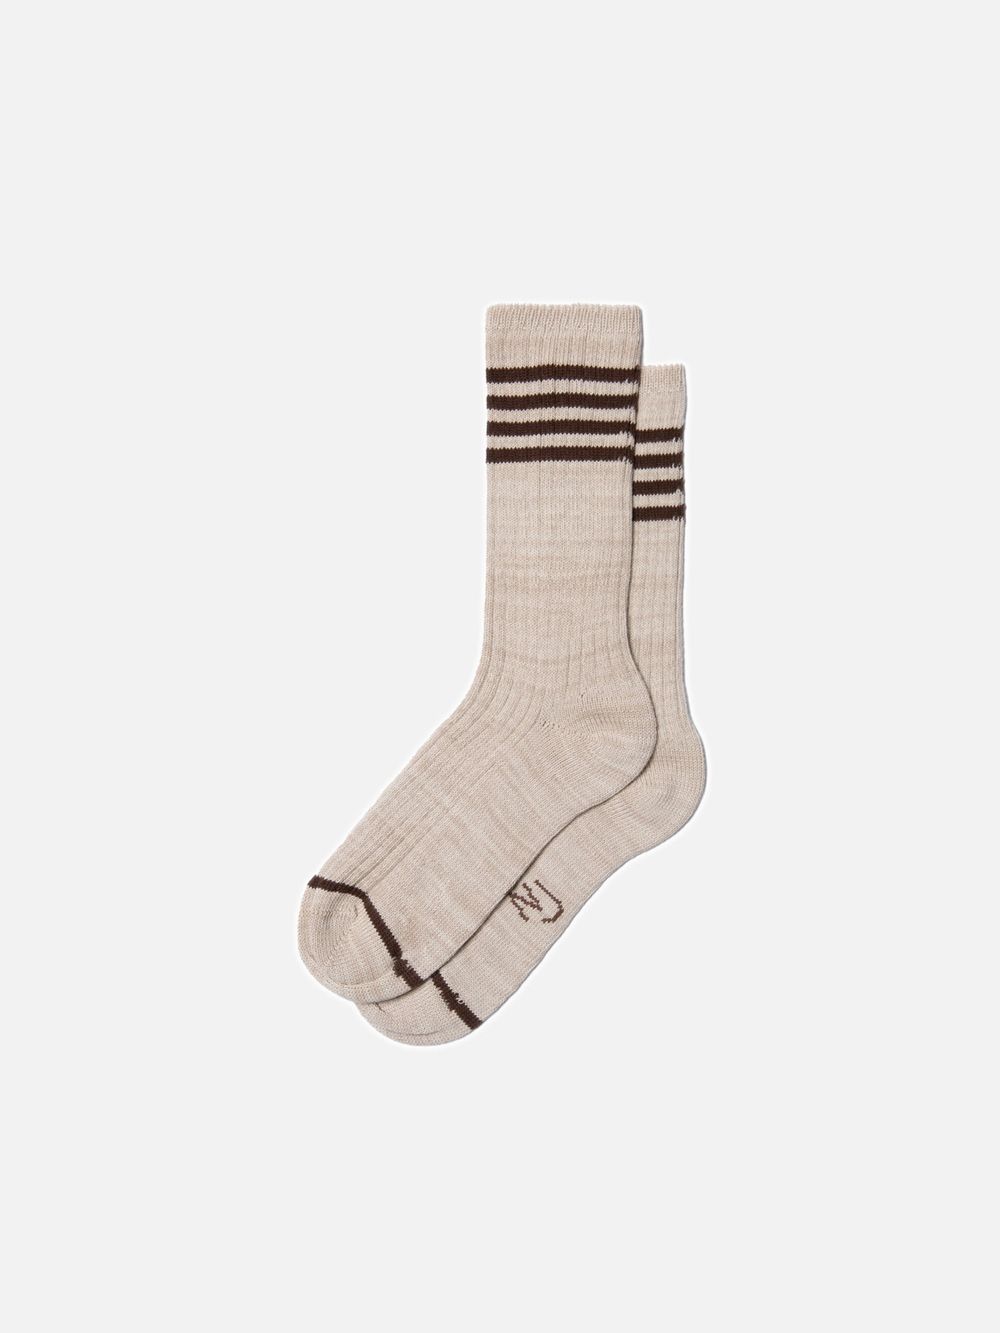 Chaussettes sportswear homme TENNIS beige made in France coton